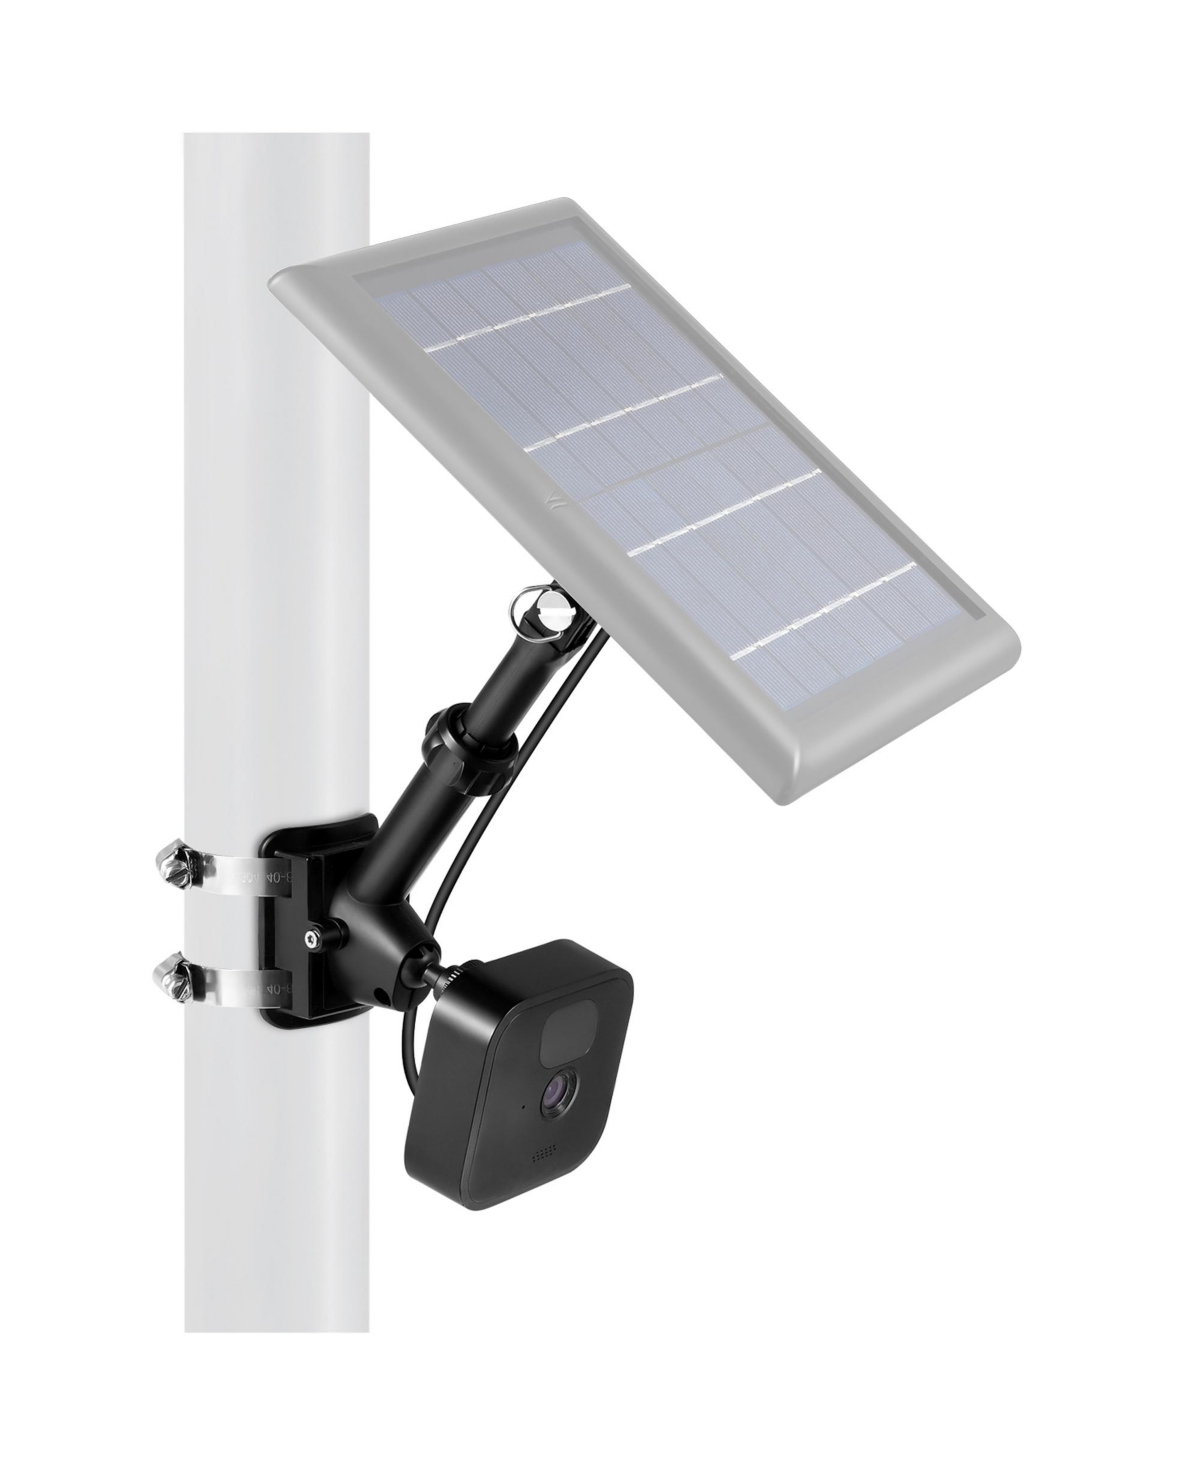 Wasserstein 2-in-1 Universal Pole Mount For Camera & Solar Panel Compatible With Wyze, Blink, Ring, Arlo, Eufy C In Black